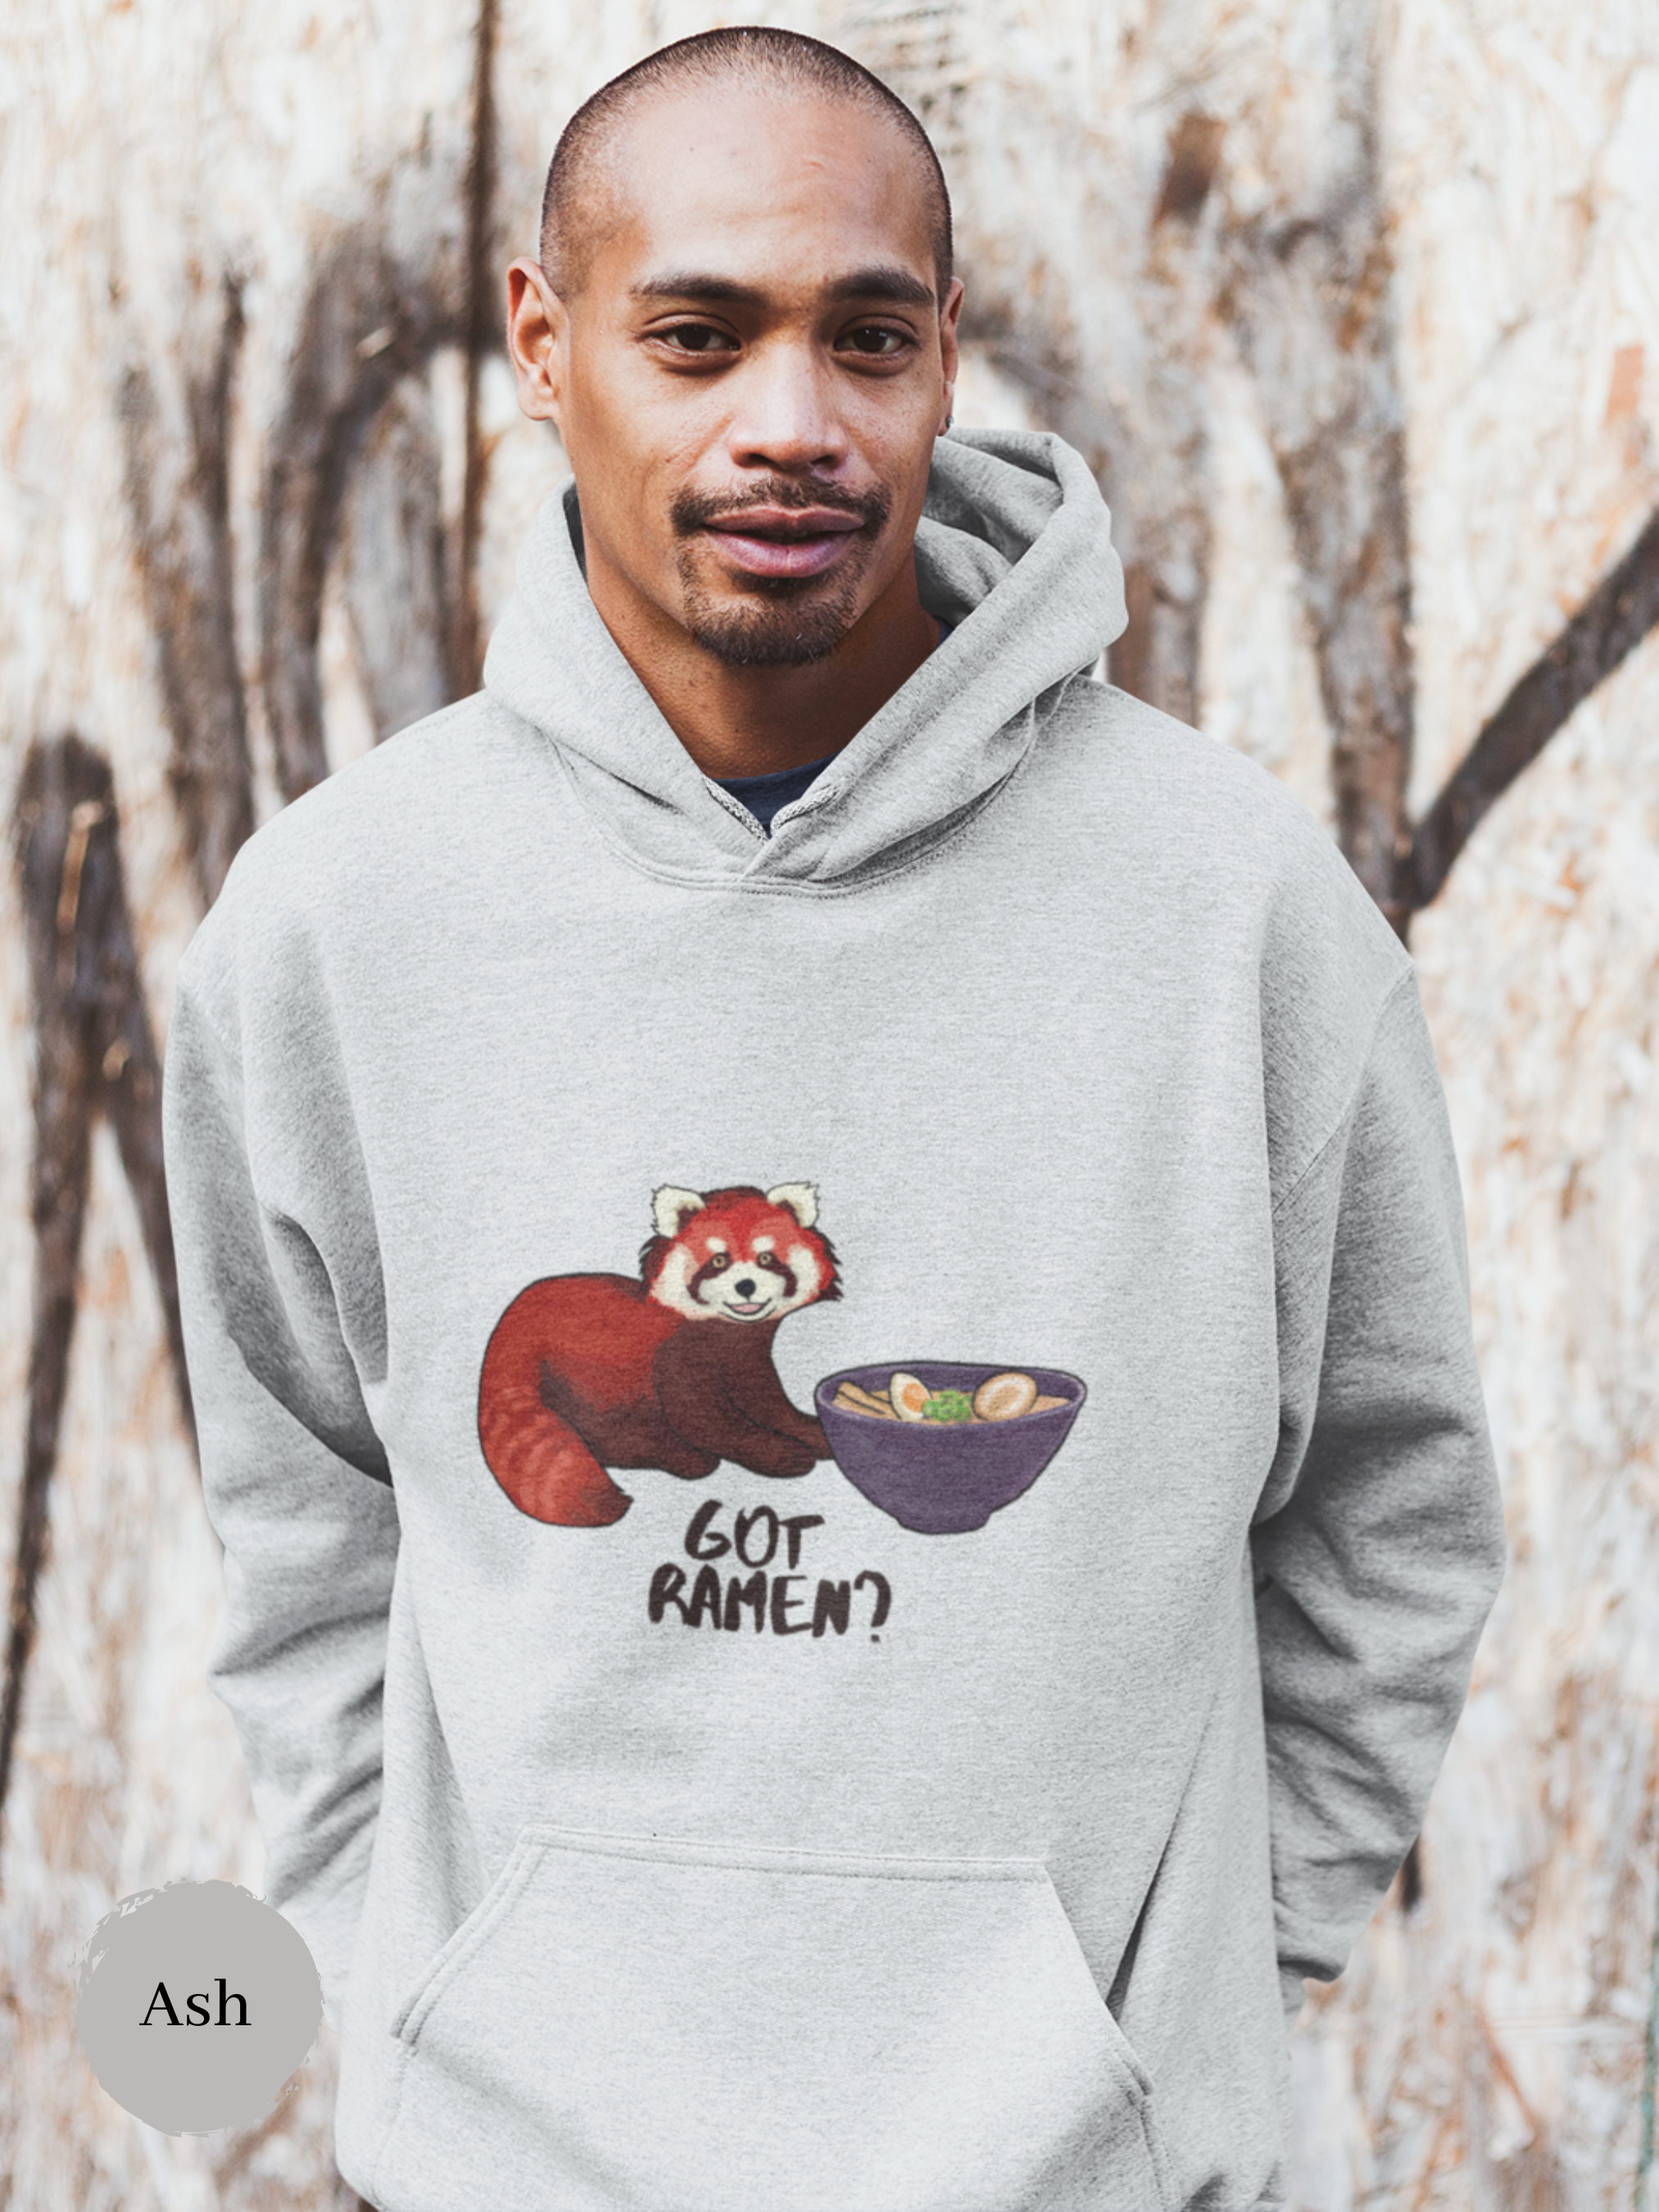 Ramen Hoodie: Got Ramen? Let this Red Panda Keep You Company While You Enjoy Your Noodles!